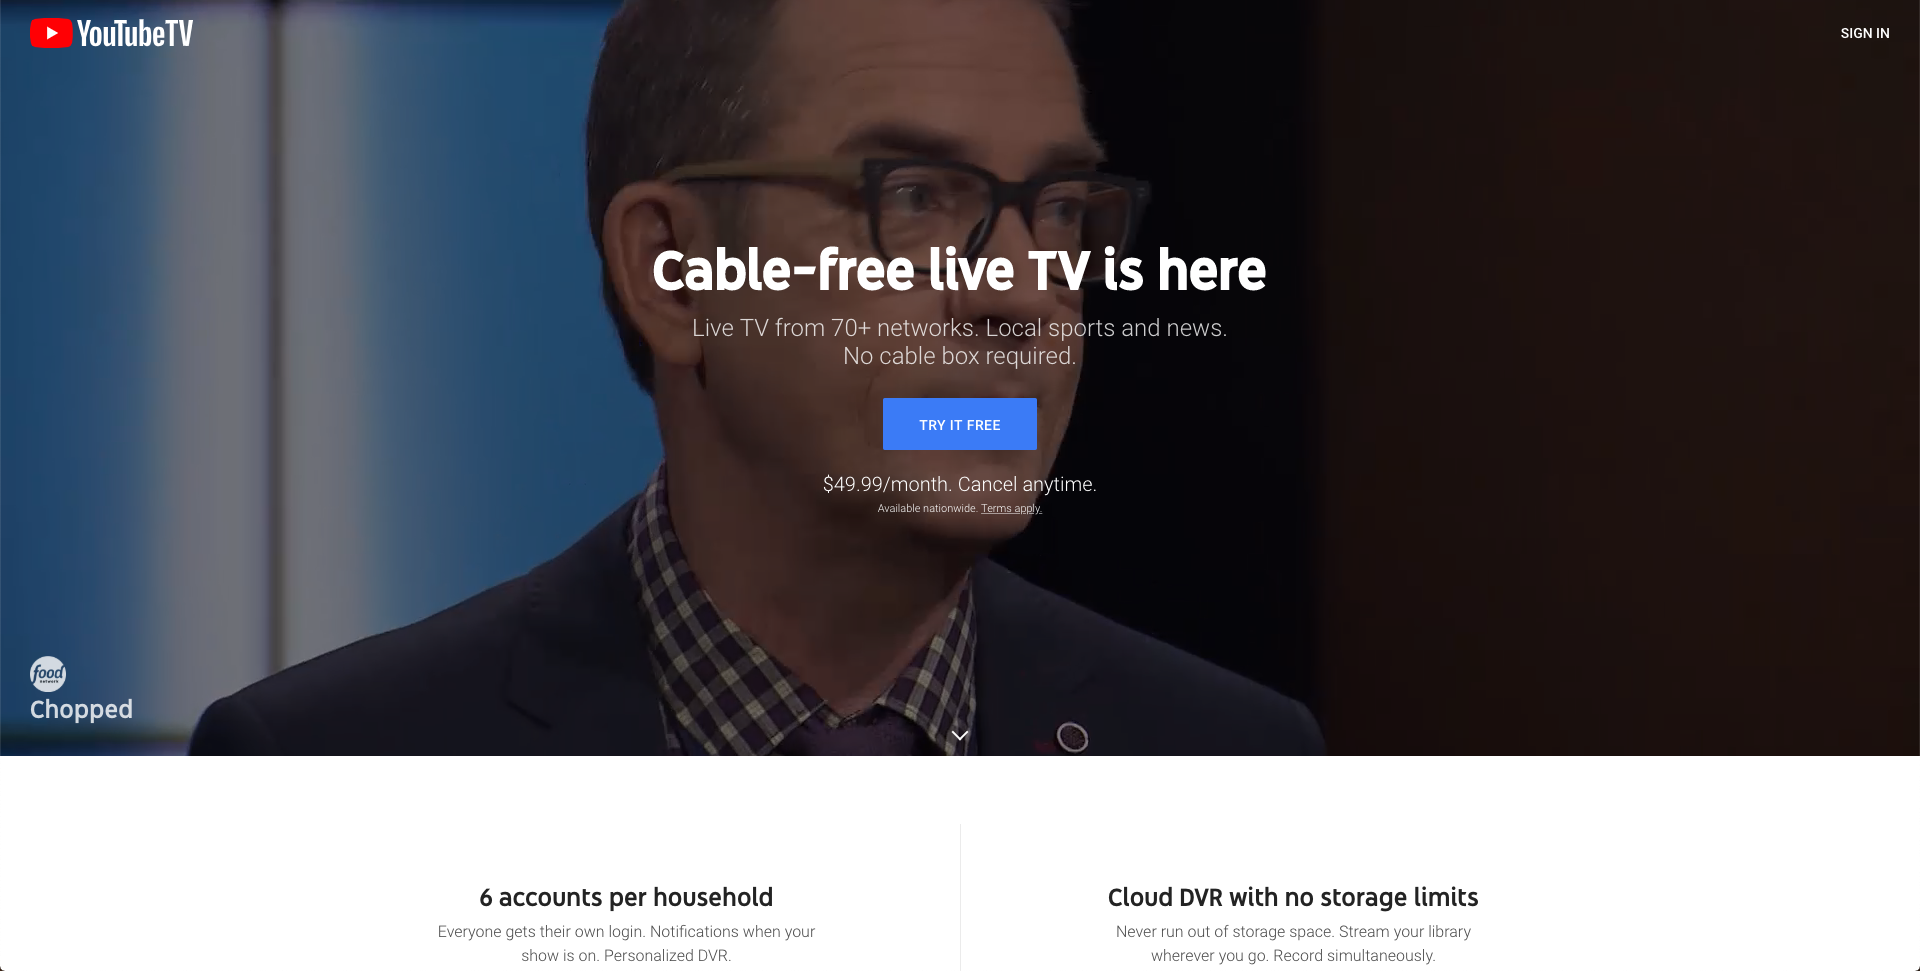 youtube tv pricing